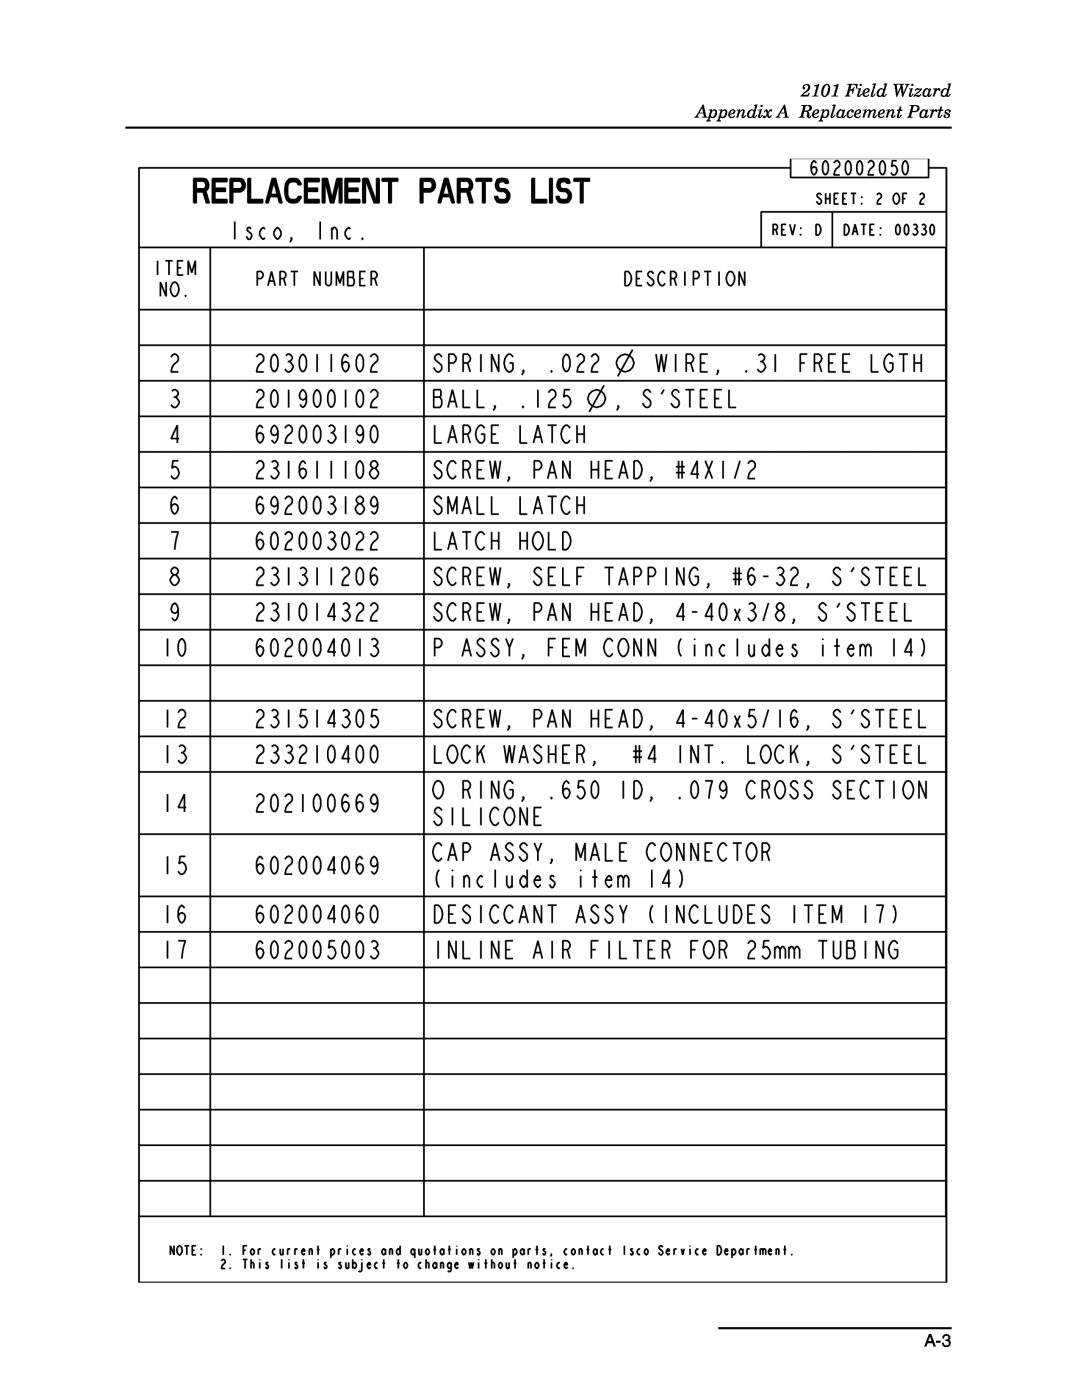 Teledyne 2101 installation and operation guide Field Wizard Appendix A Replacement Parts 